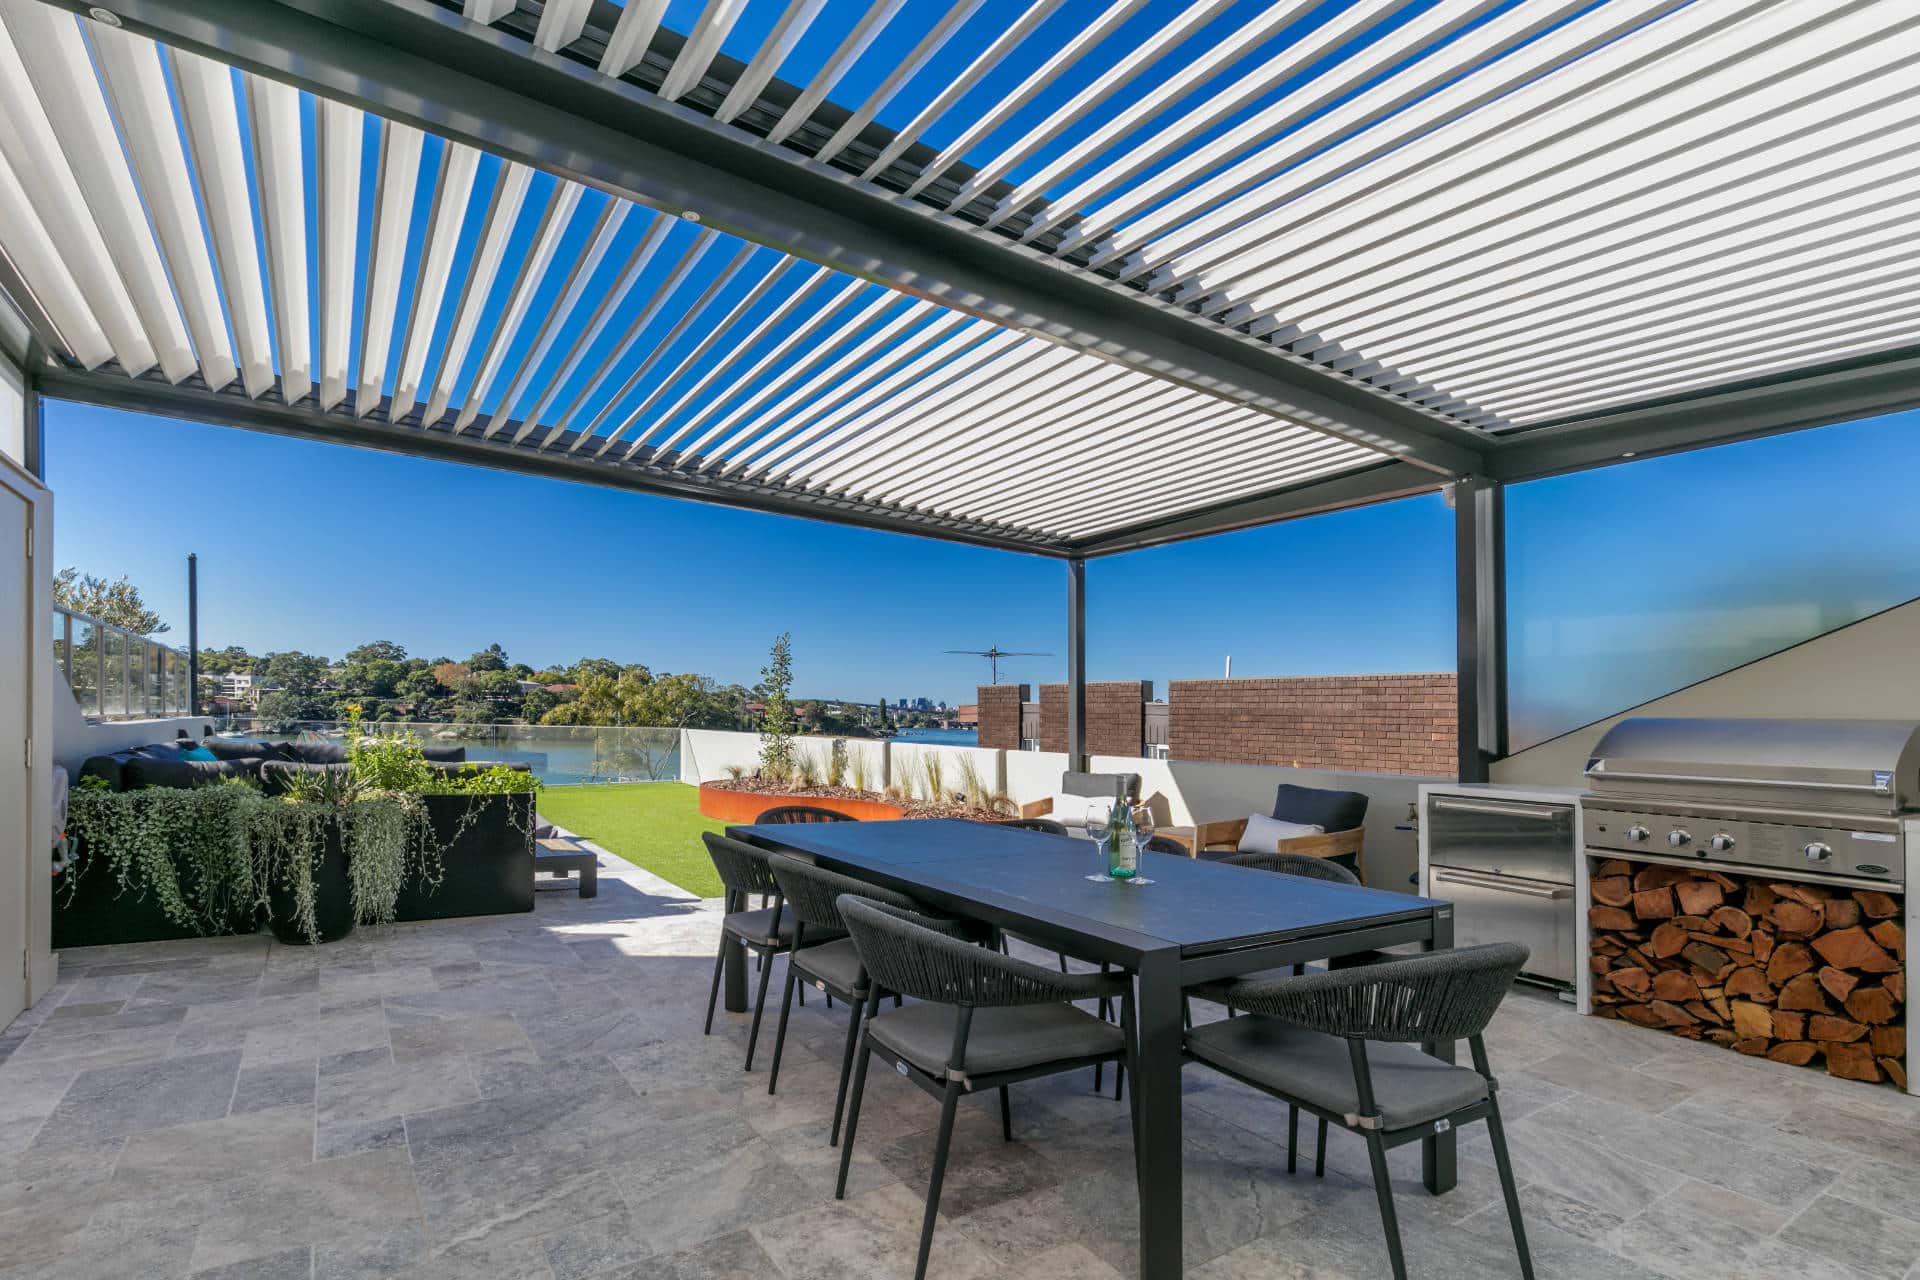 Abbotsford pergola with outdoor dining setting.